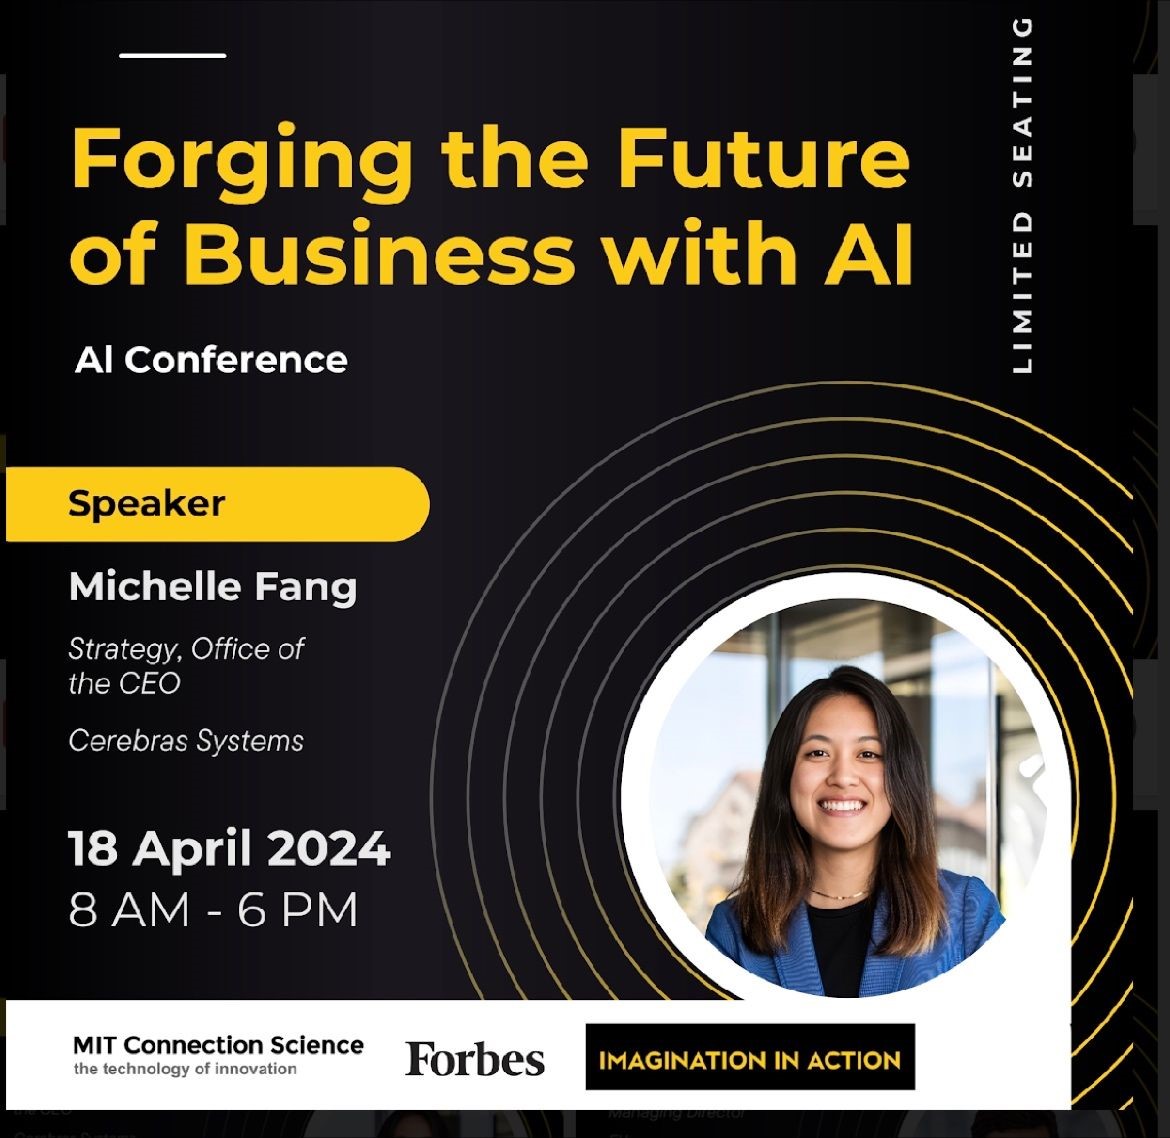 Cerebras Strategist Michelle Fang will be speaking at the Forging the Future of Business with AI Conference, hosted by Forbes, Imagination in Action, and MIT Connection Science. Michelle will speak at a panel discussion on “GenAI for Innovation,' which will unpack emerging best